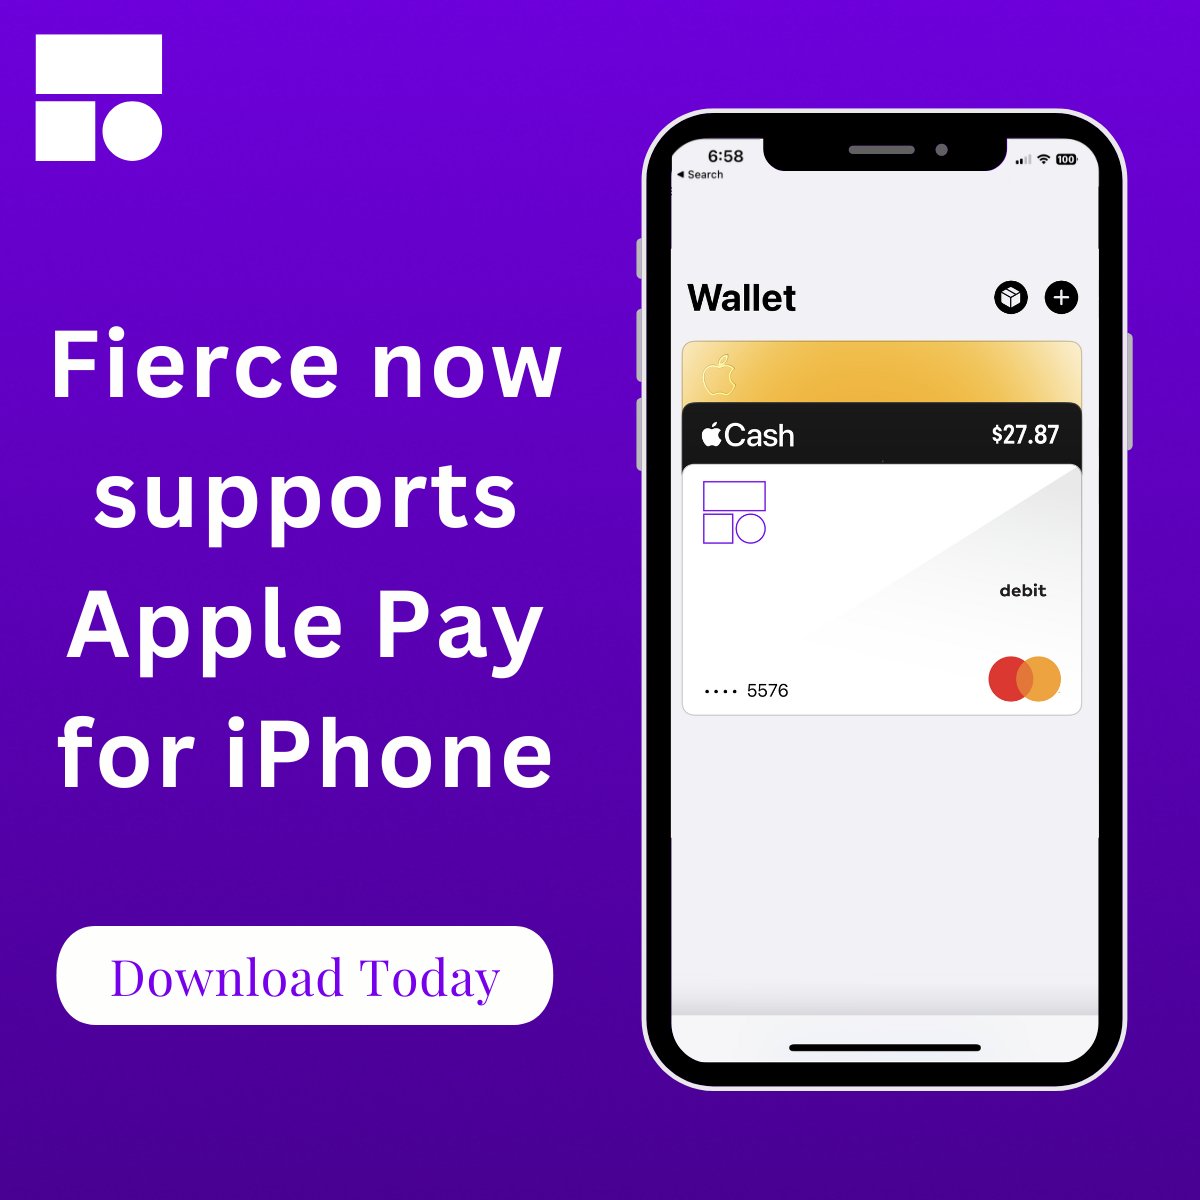 Fierce supports Apple Pay for iPhone. Accessing your funds has never been easier. Convenience at your fingertips - because time is your most precious asset. Bring the power of 5.25% APY and Apple Pay together, with Fierce. #ApplePay #TimeSaver #Efficiency